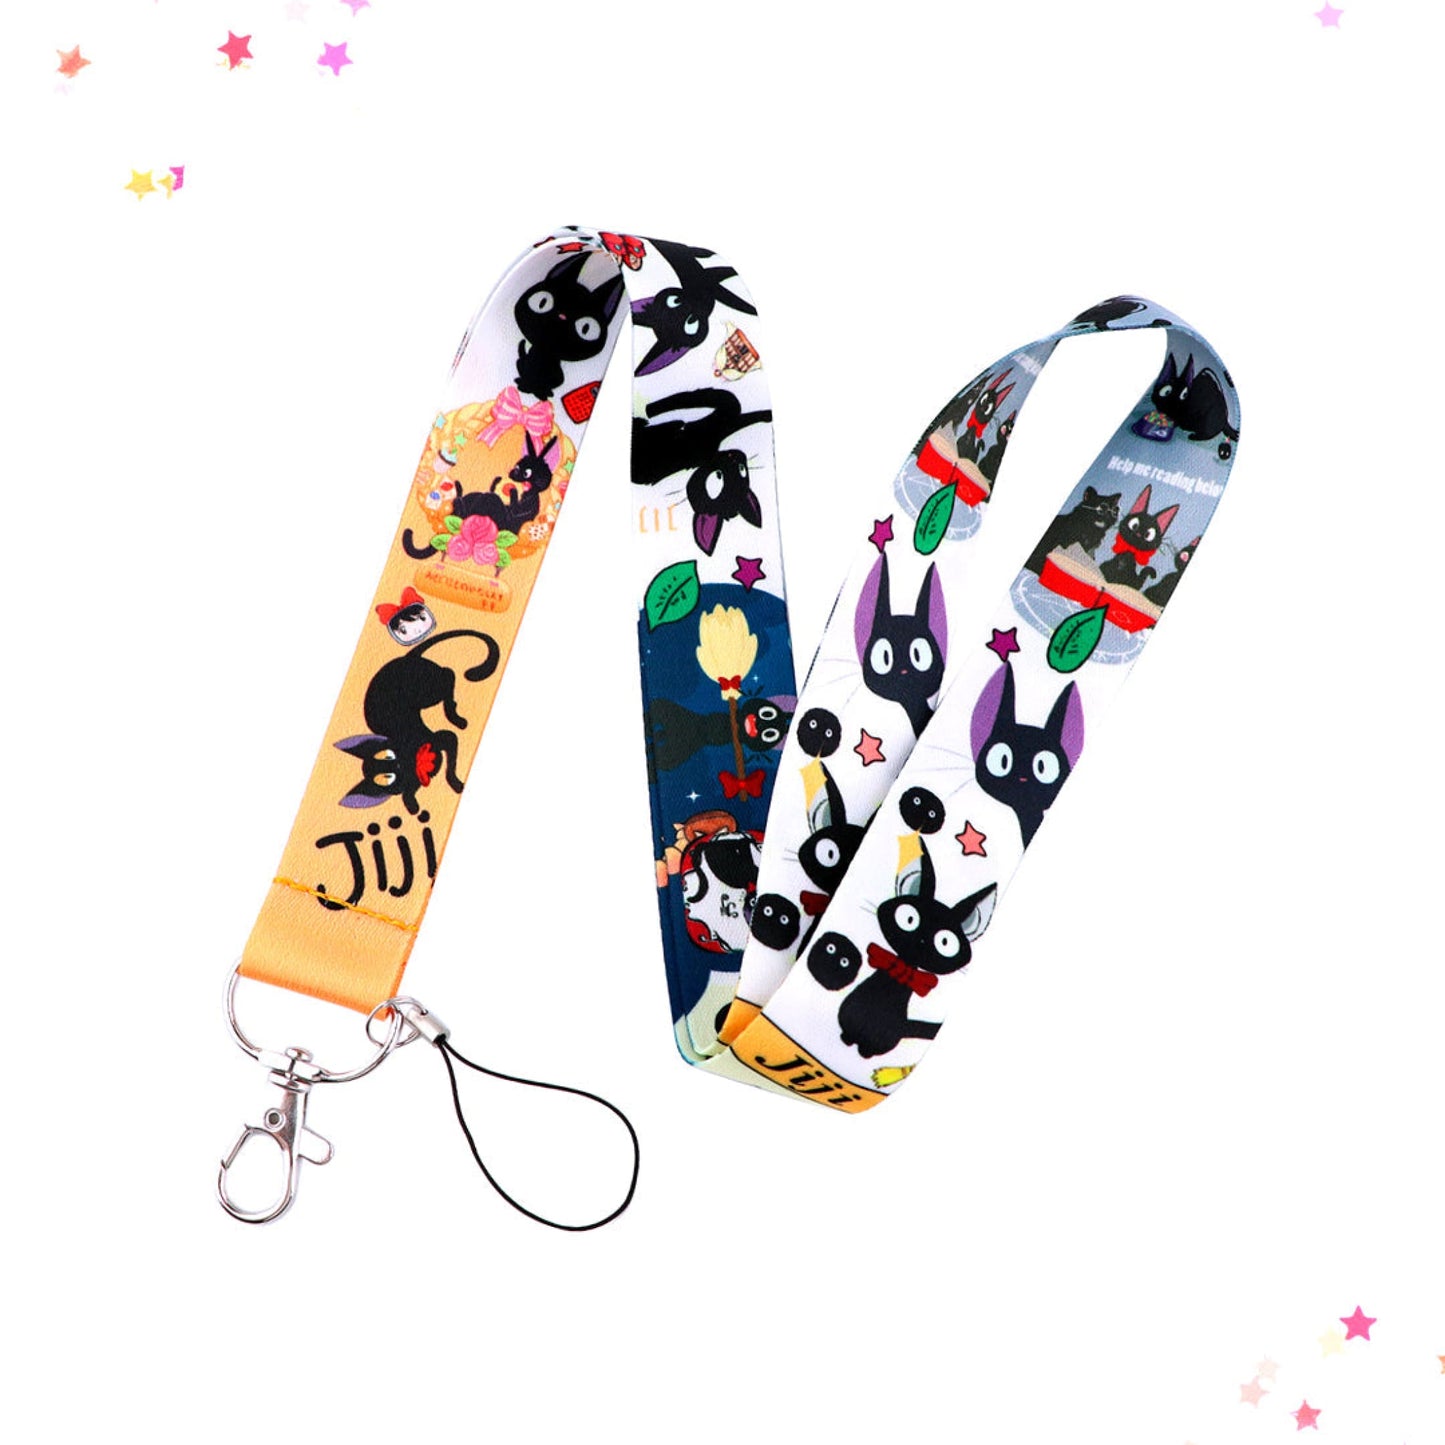 Kiki's Delivery Service Jiji Lanyard from Confetti Kitty, Only 9.99